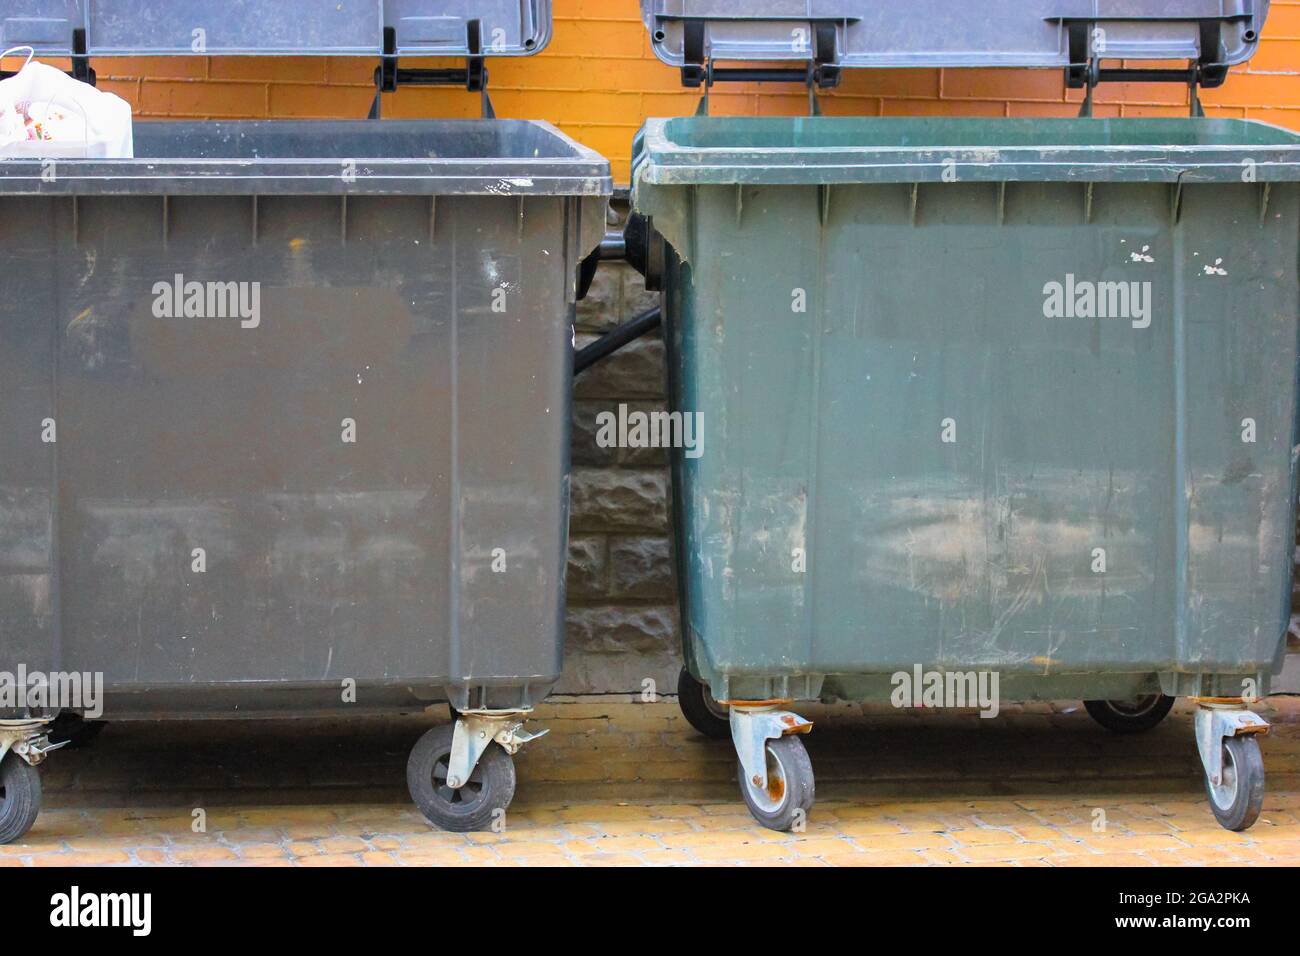 https://c8.alamy.com/comp/2GA2PKA/plastic-large-trash-cans-with-the-lids-up-and-garbage-inside-against-a-brick-orange-wall-big-green-and-grey-plastic-dumpsters-on-a-city-street-waste-2GA2PKA.jpg